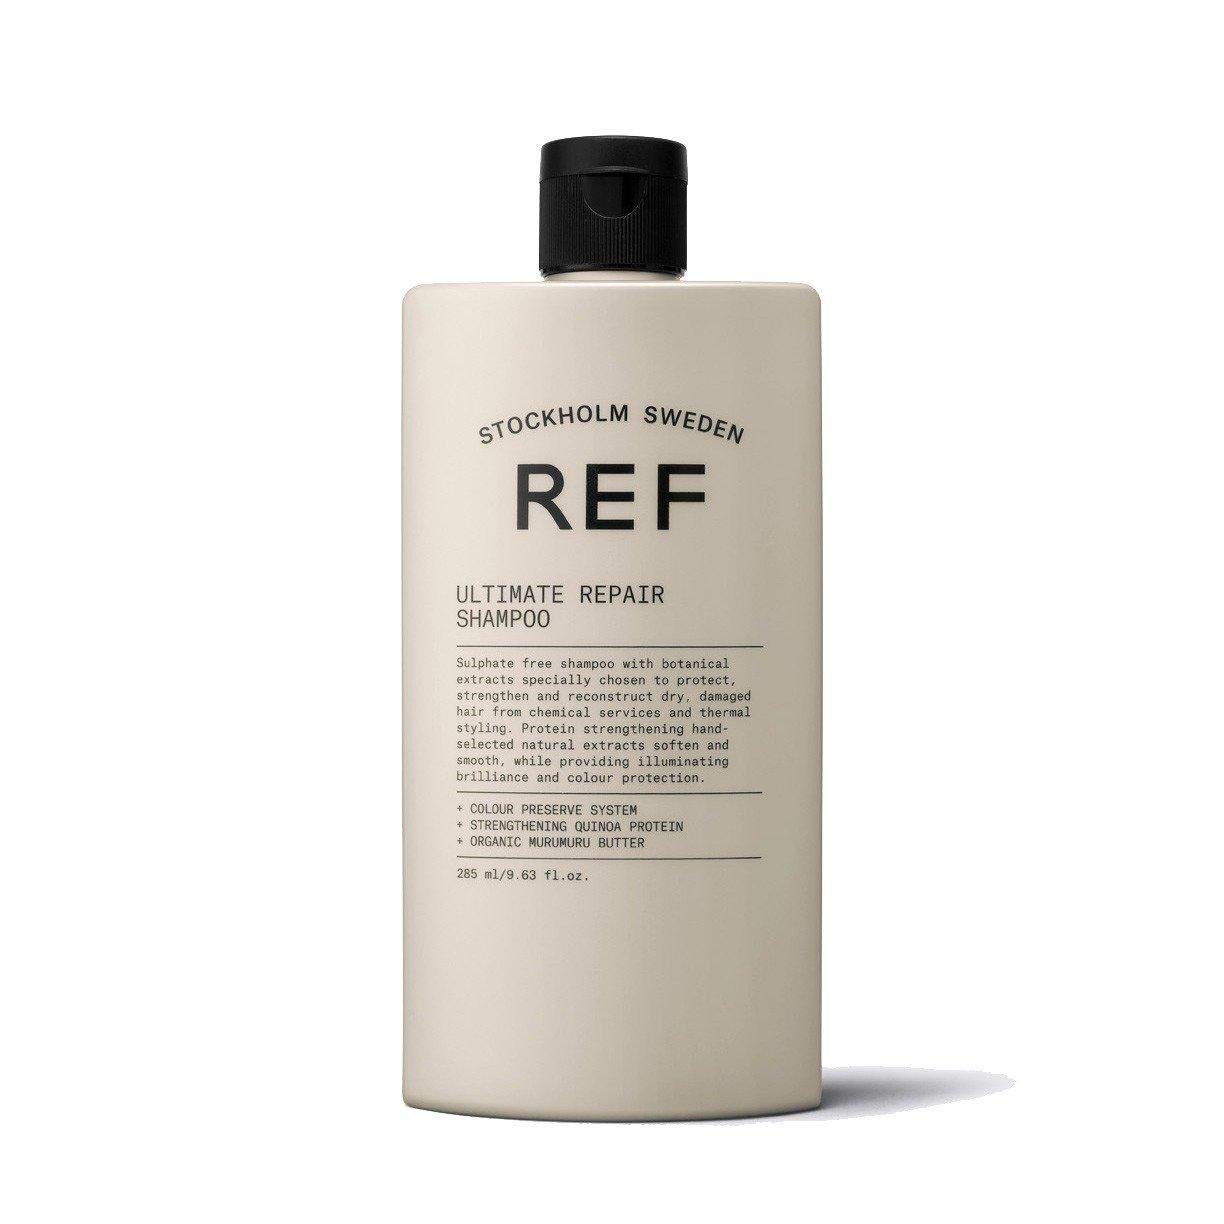 REF Reference of Sweden Ultimate Repair Shampoo 9.63 oz | Reference of Sweden